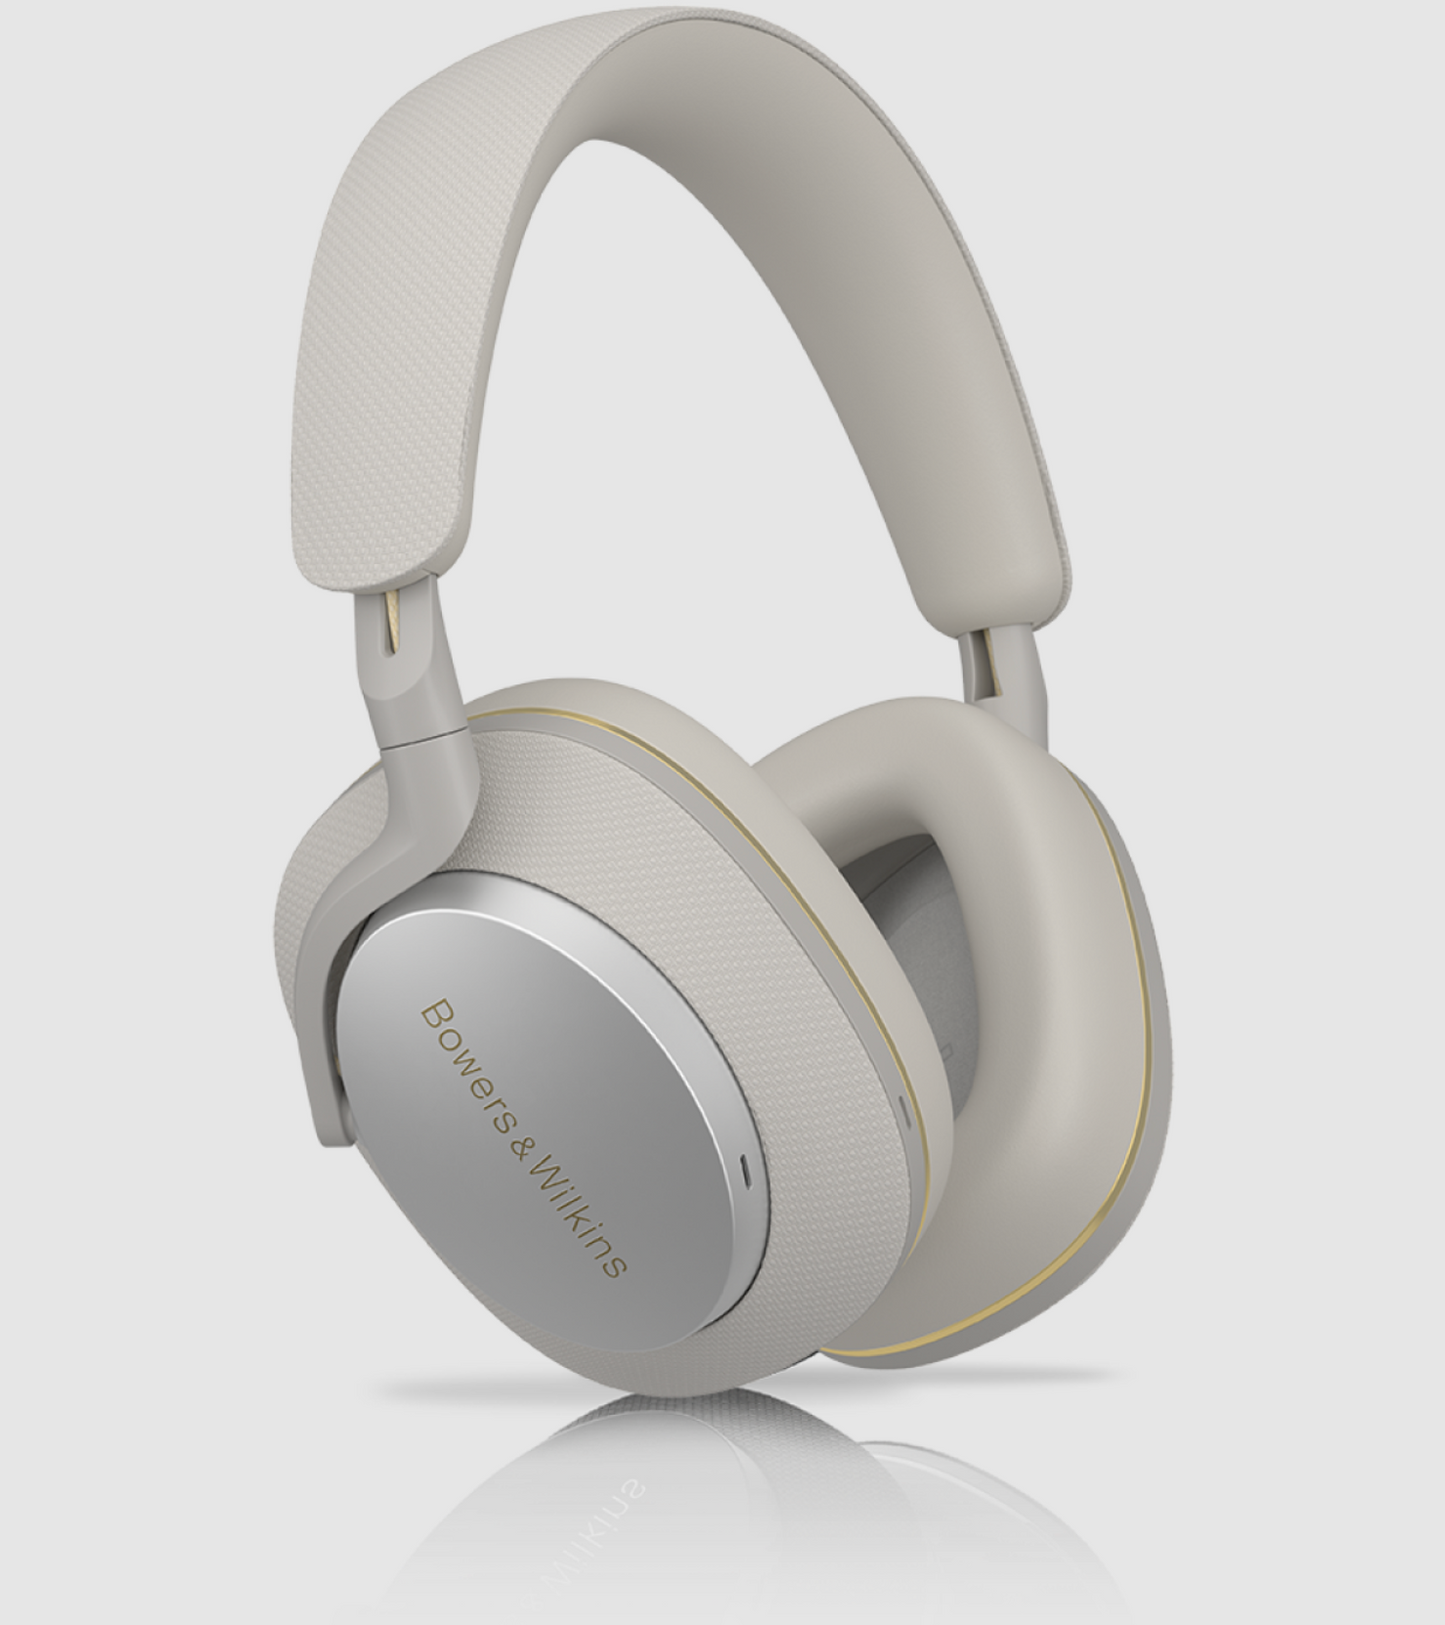 B&W Px7 S2e Noise Cancelling Headphones in Cloud Gray. 